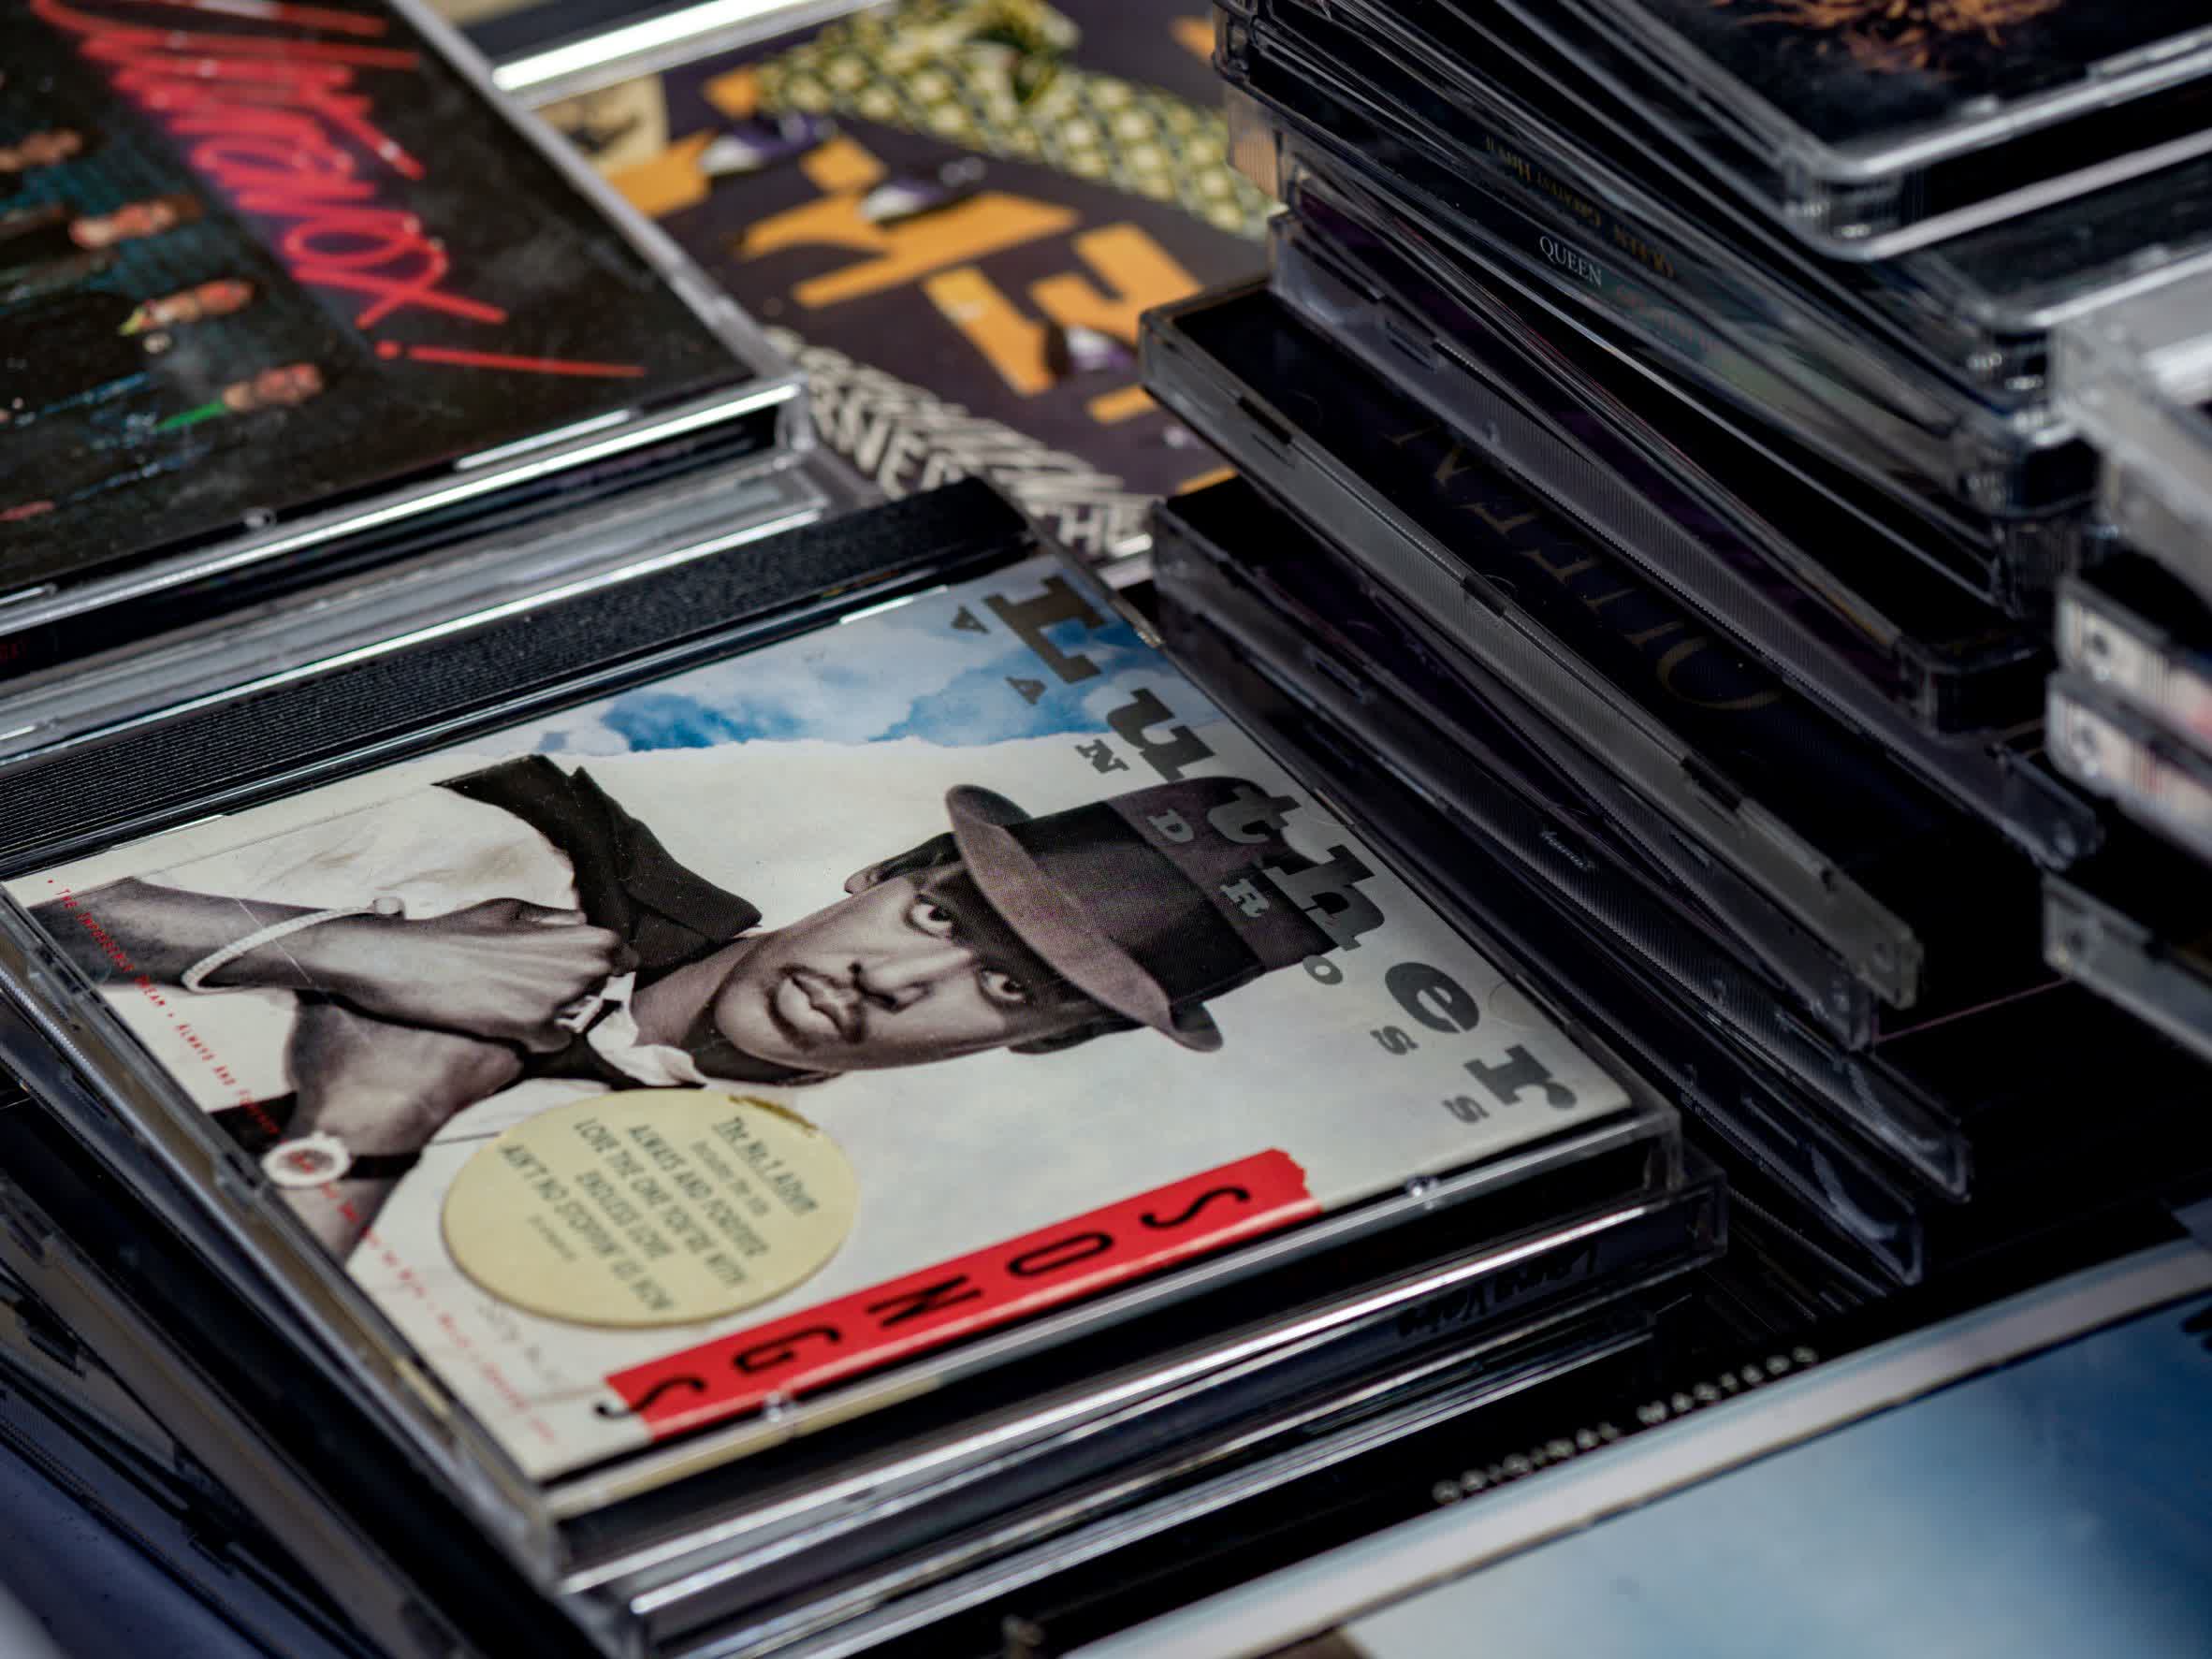 Music CD sales increased last year for the first time since 2004